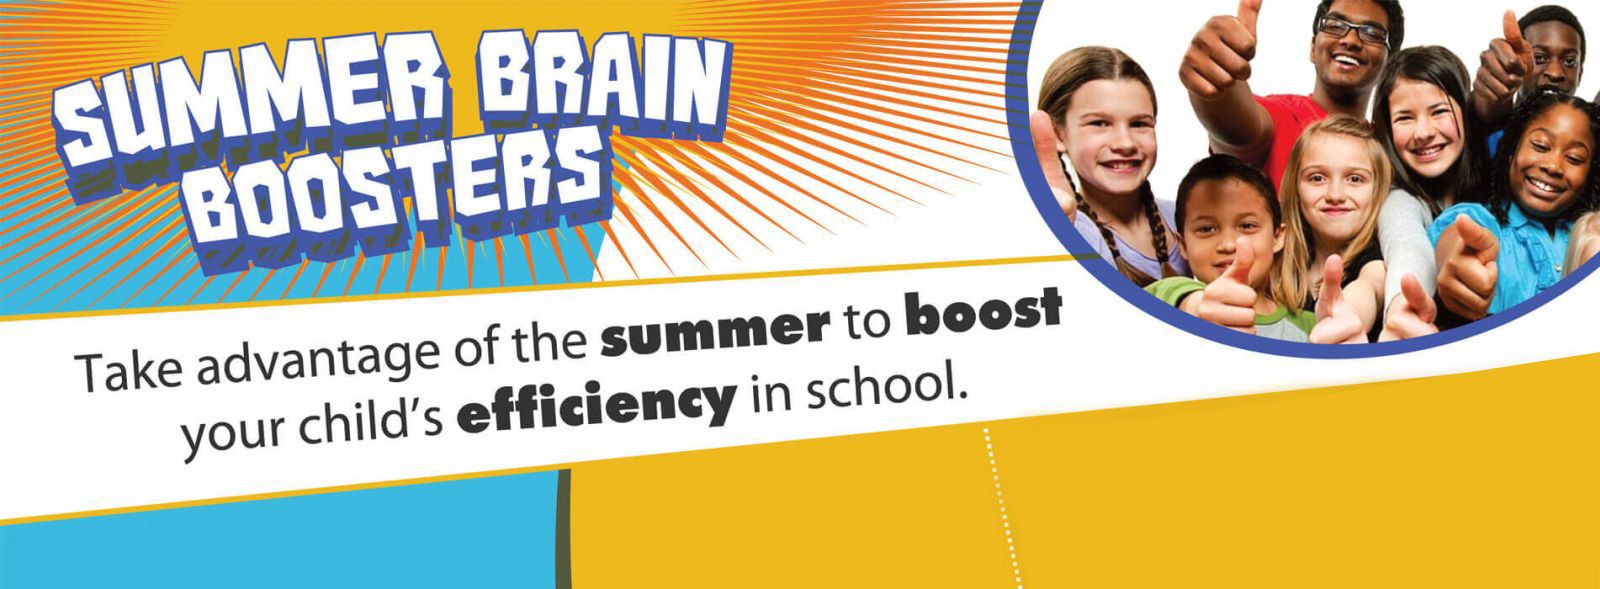 SIgn Up for Learning Foundations Brain Boosting Summer Programs